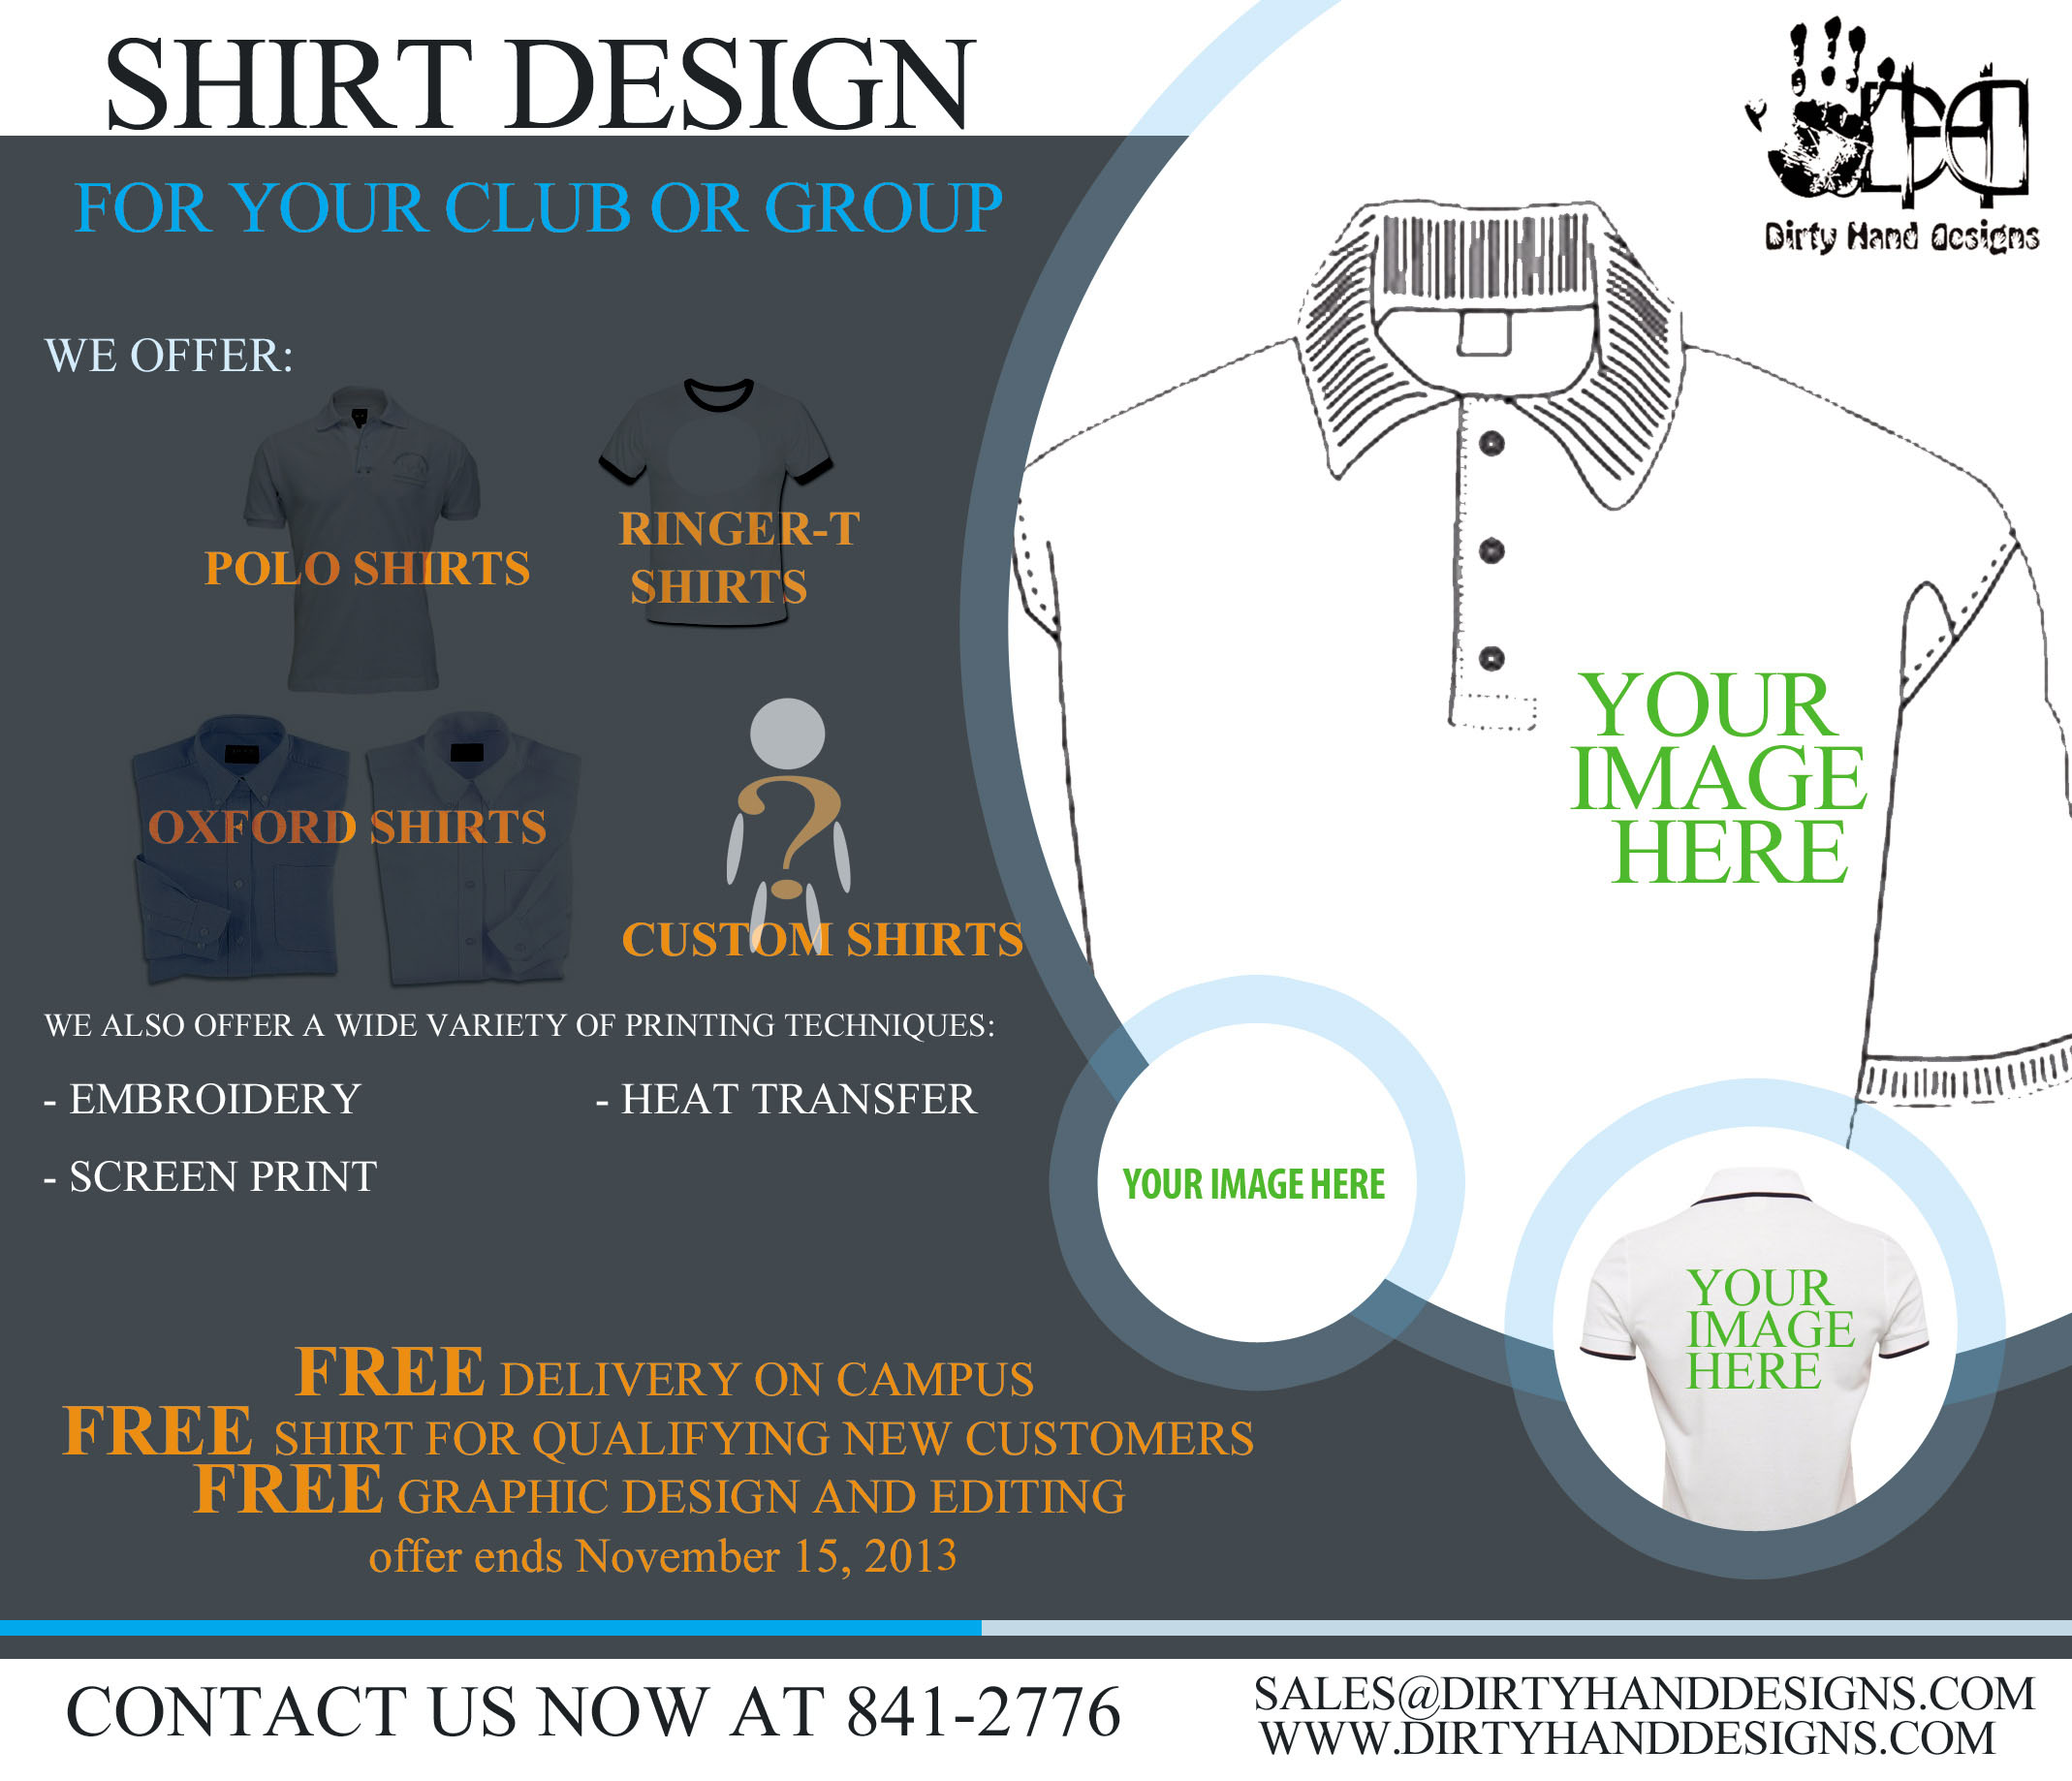 Shirt Designs for your club or group